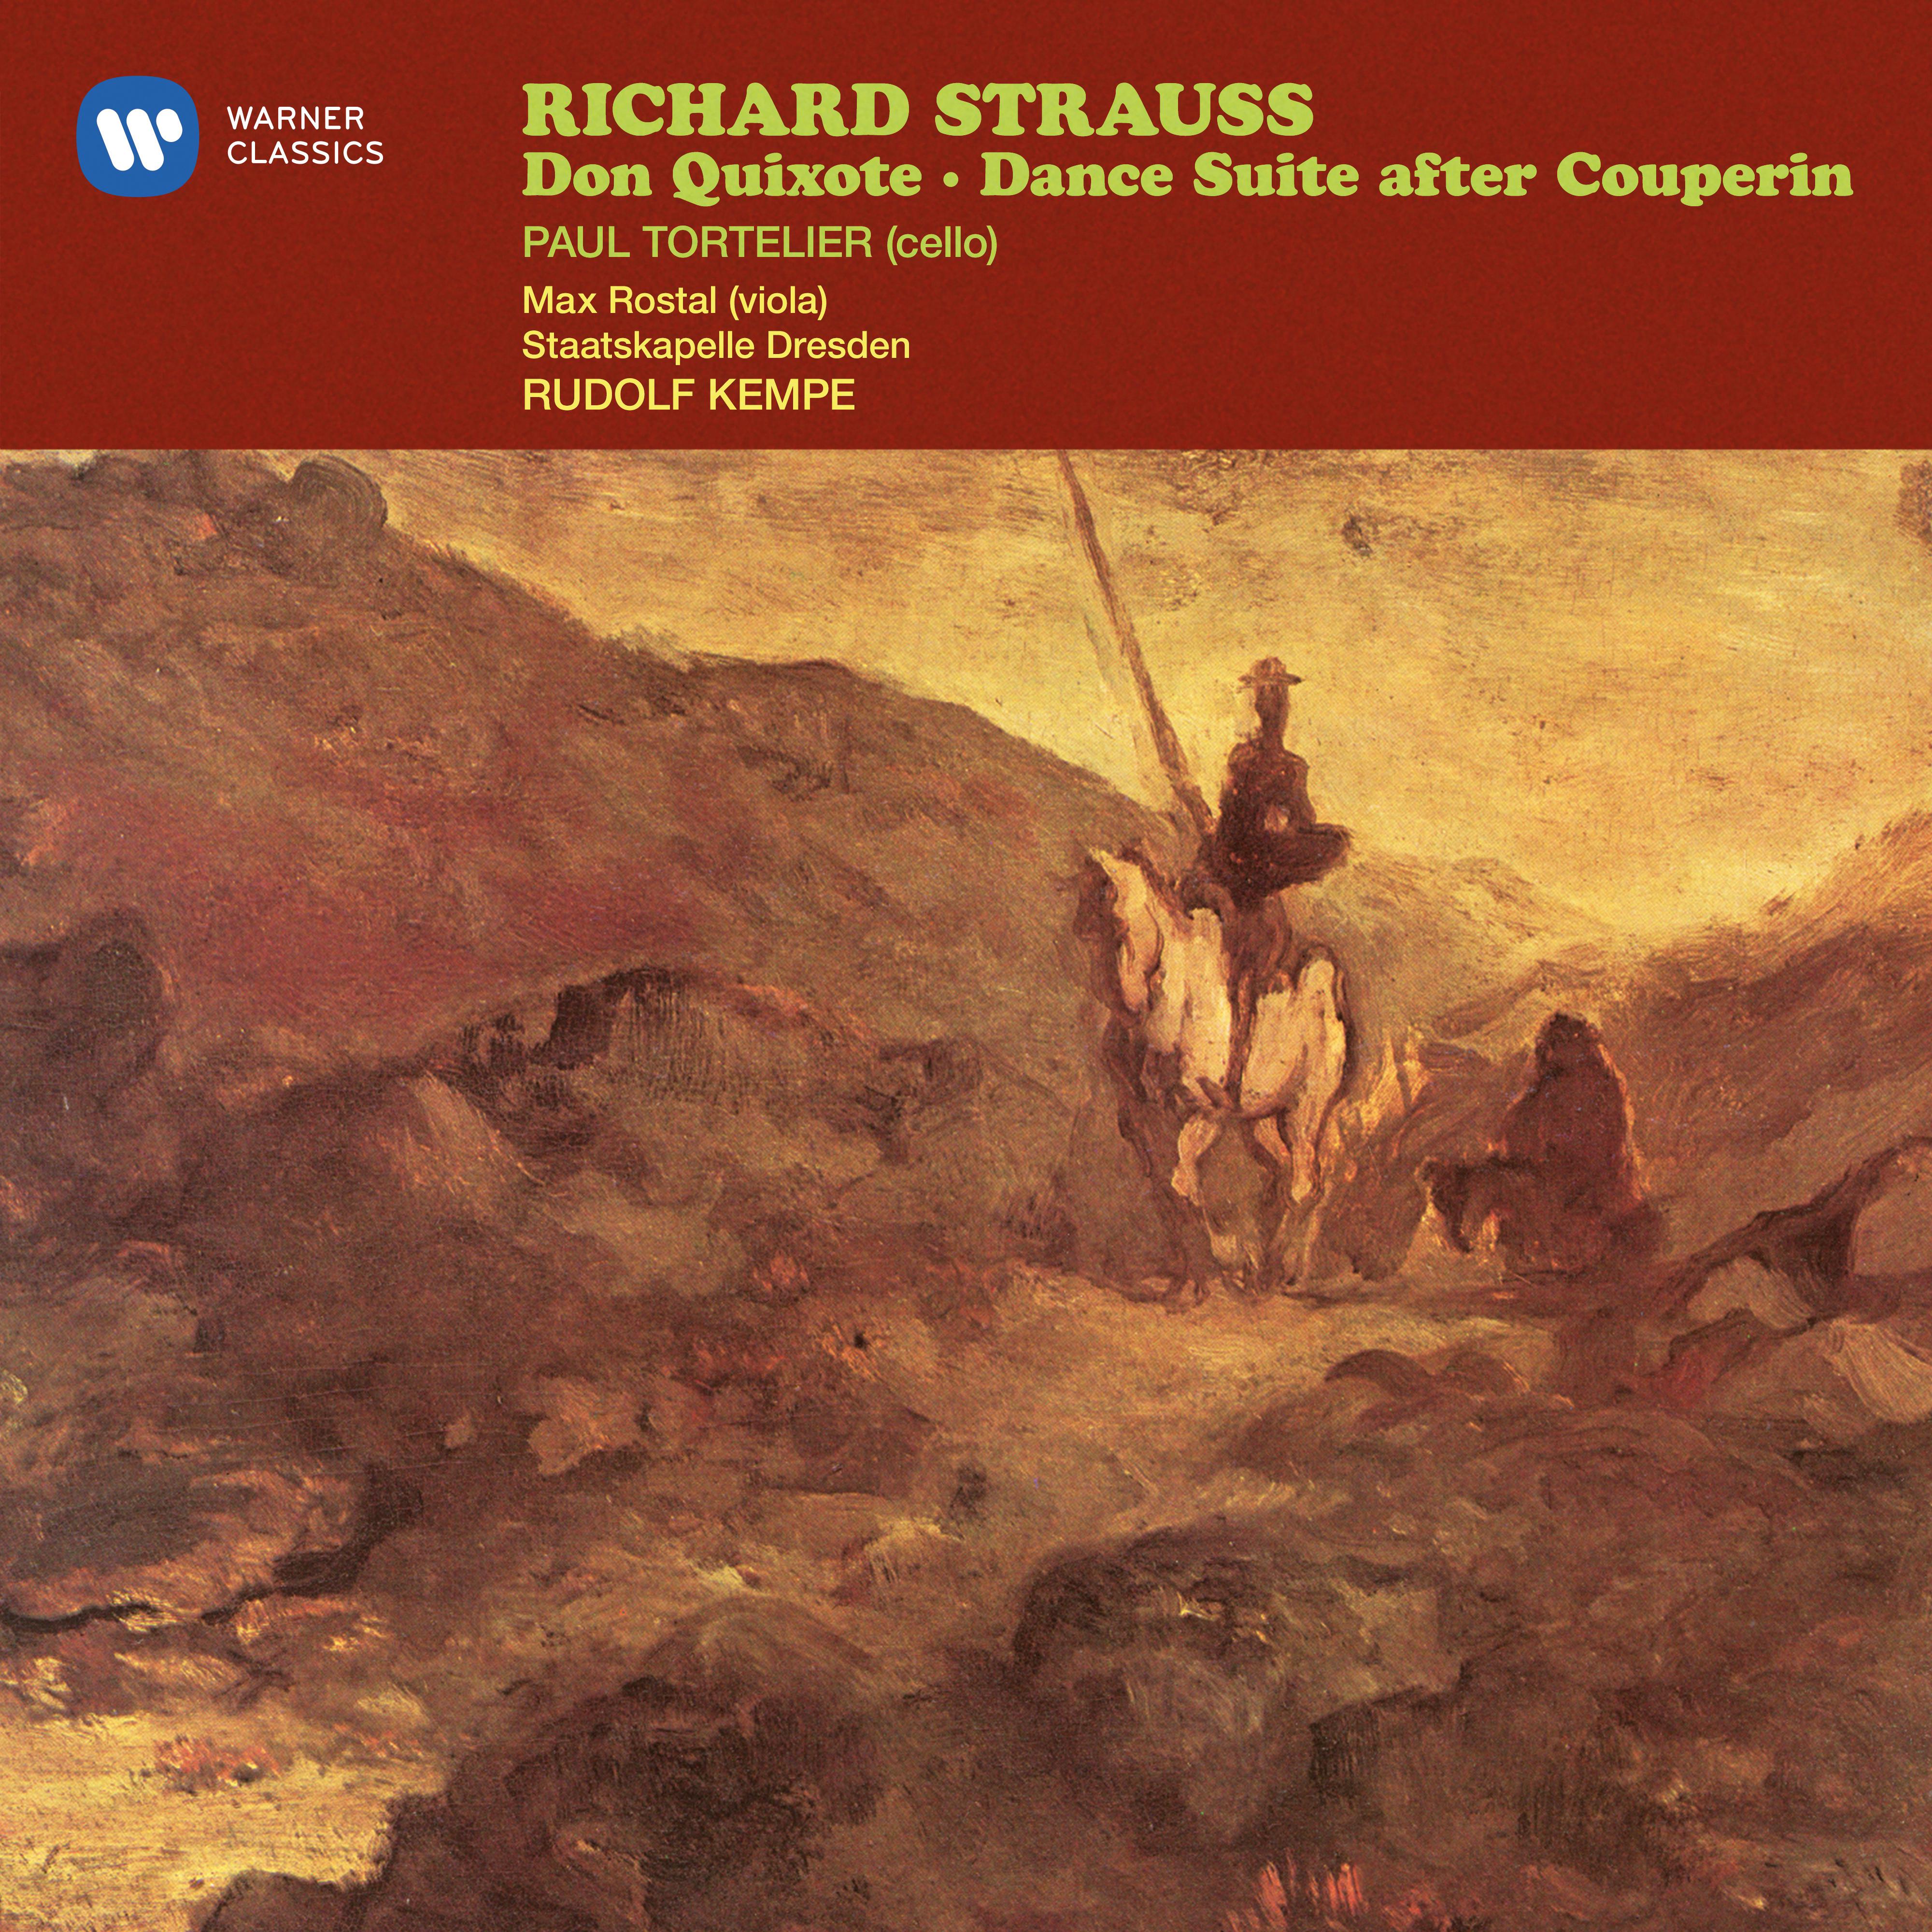 Strauss: Don Quixote, Op. 35  Dance Suite from Keyboard Pieces by Fran ois Couperin